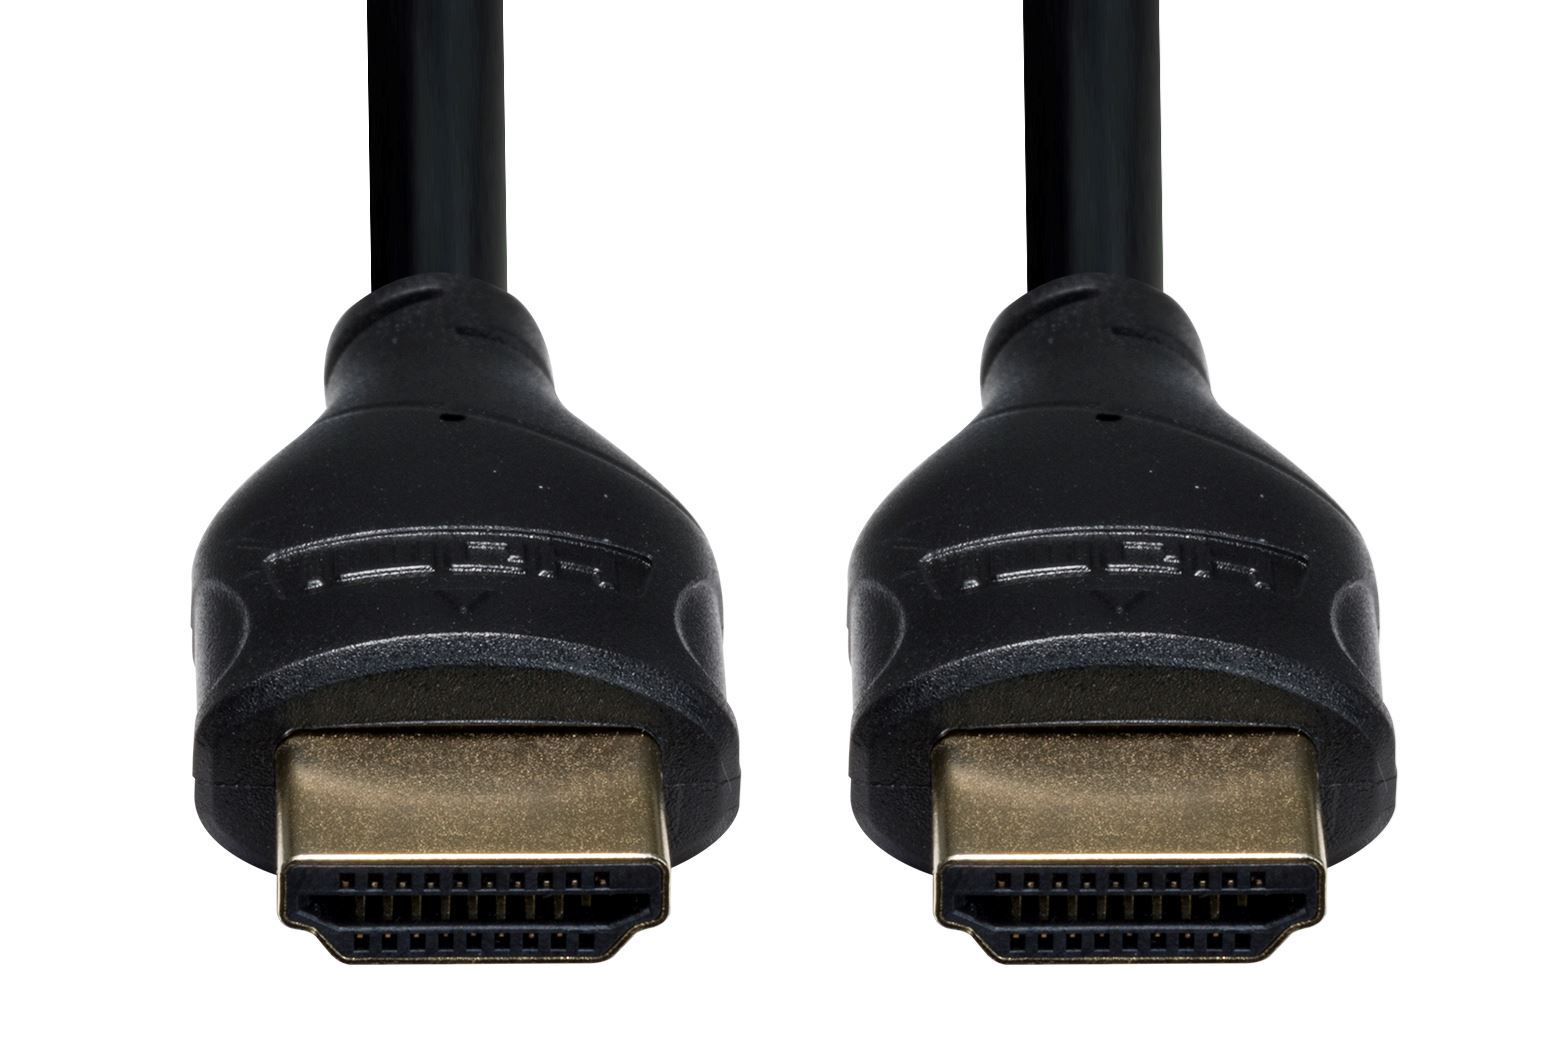 DYNAMIX_2m_HDMI_10Gbs_Slimline_High-Speed_Cable_with_Ethernet._Max_Res:_4K2K@24/30Hz_(3840x2160)_8_Audio_channels._8bit_colour_depth._Supports_CEC,_3D,_ARC,_Ethernet. 875